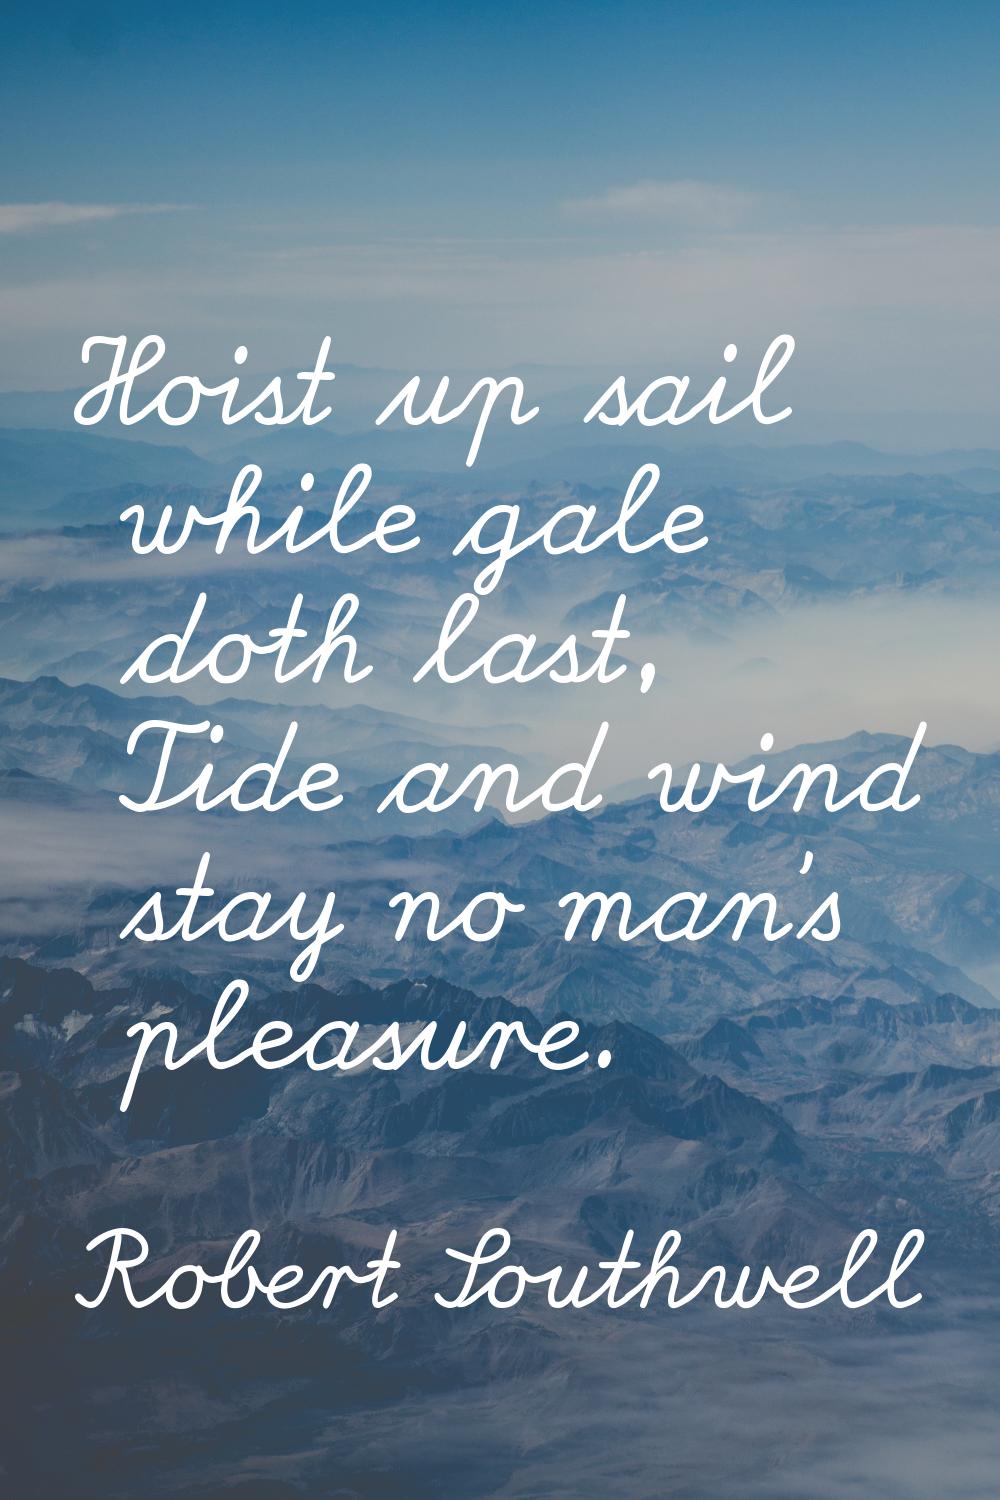 Hoist up sail while gale doth last, Tide and wind stay no man's pleasure.